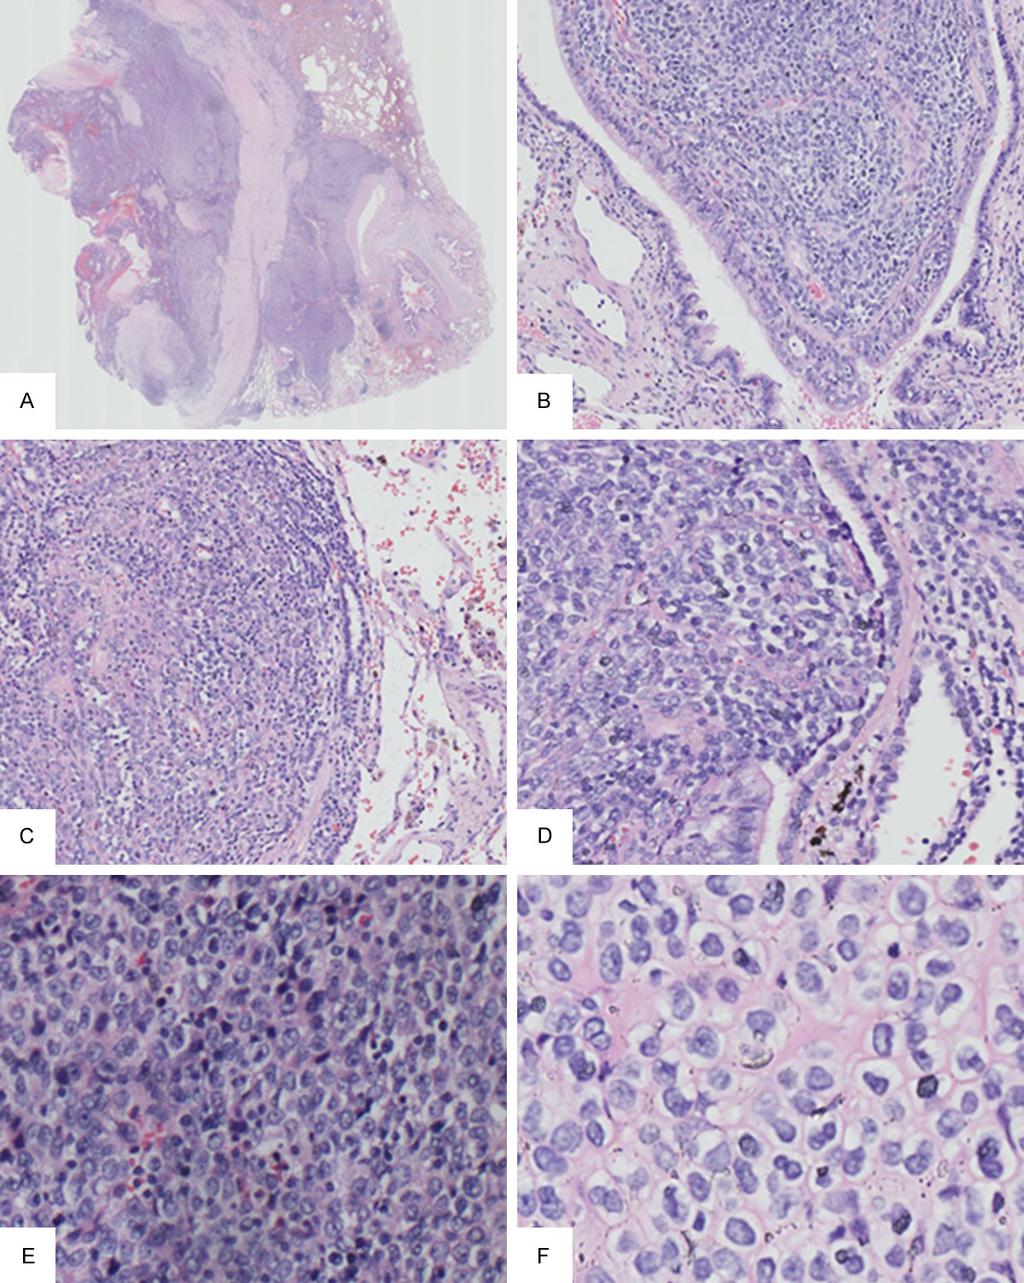 Figure 1. Morphological change of the tumor. A. The tumor was not well circumscribed with central hemorrhaging and peripheral infiltration into the normal lung tissue. B.